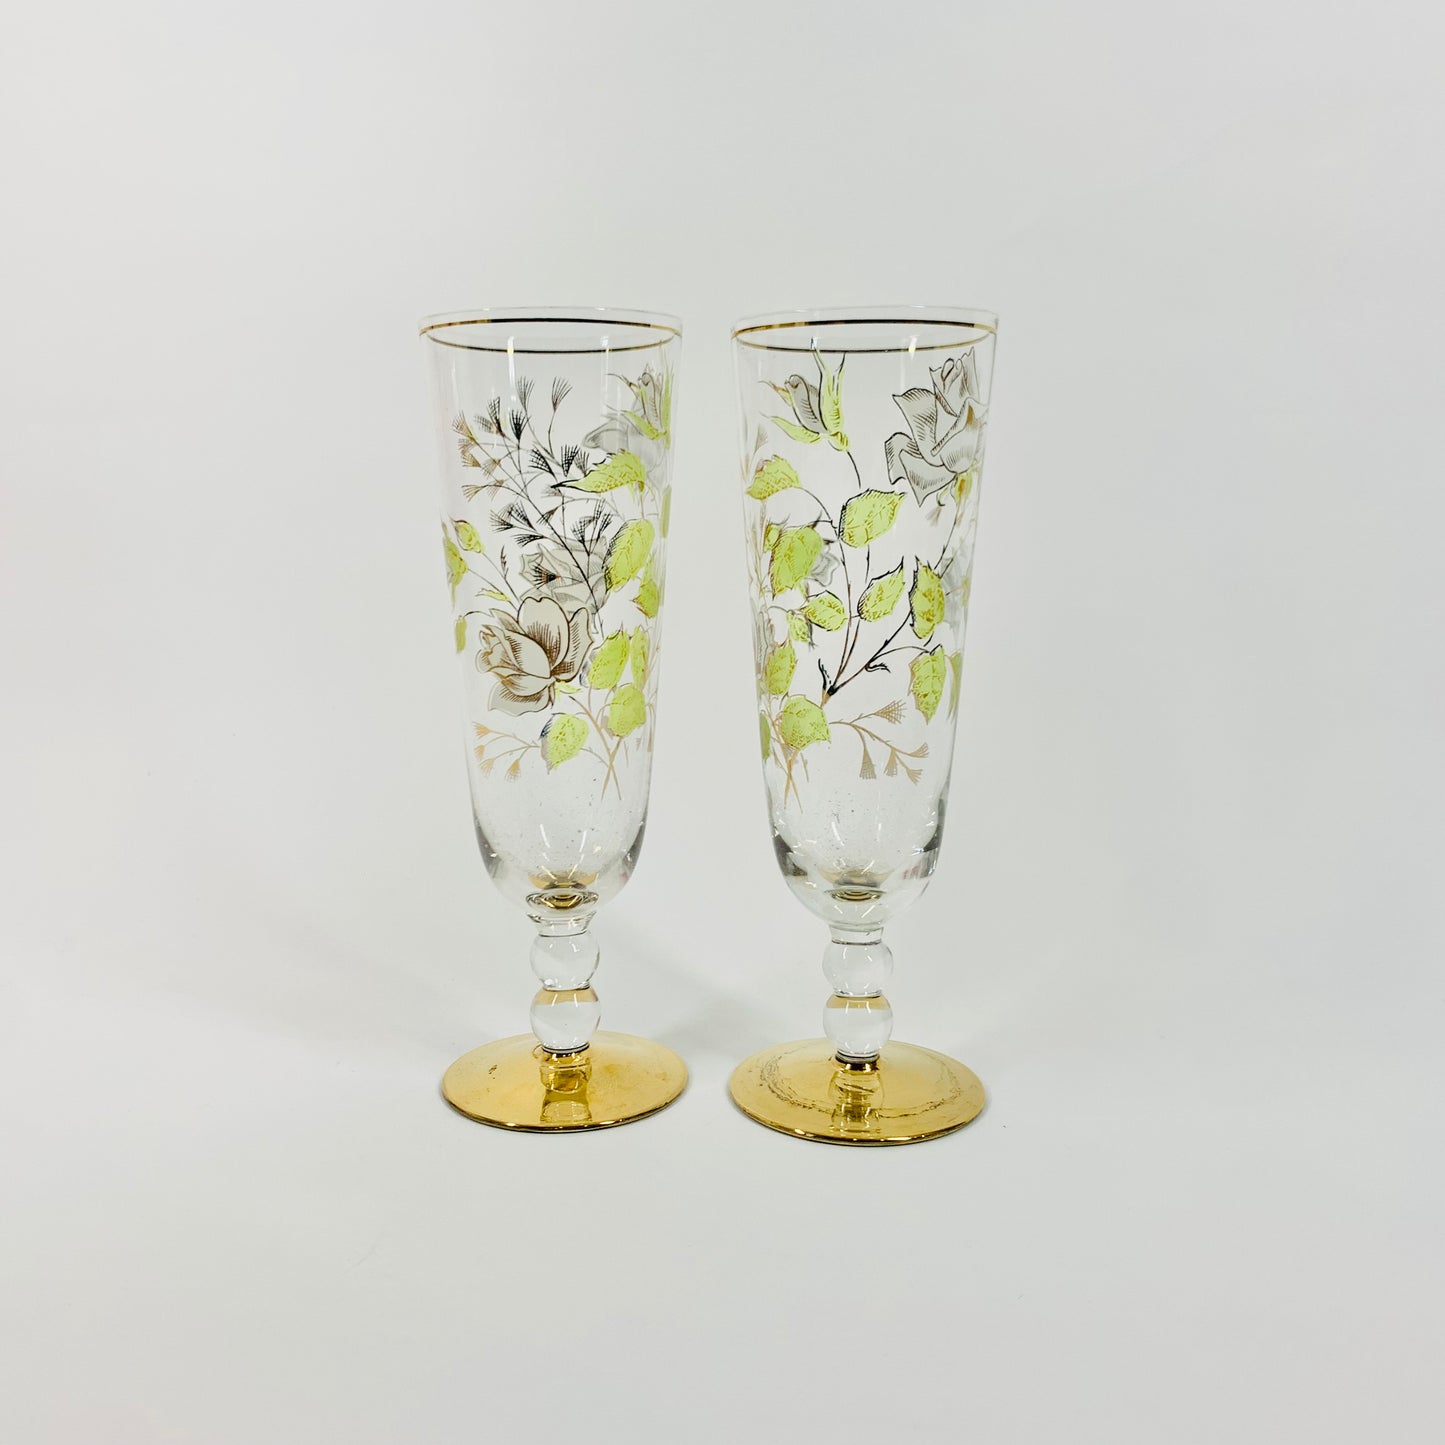 Midcentury hand painted Bohemian glass champagne flutes with gold gilding